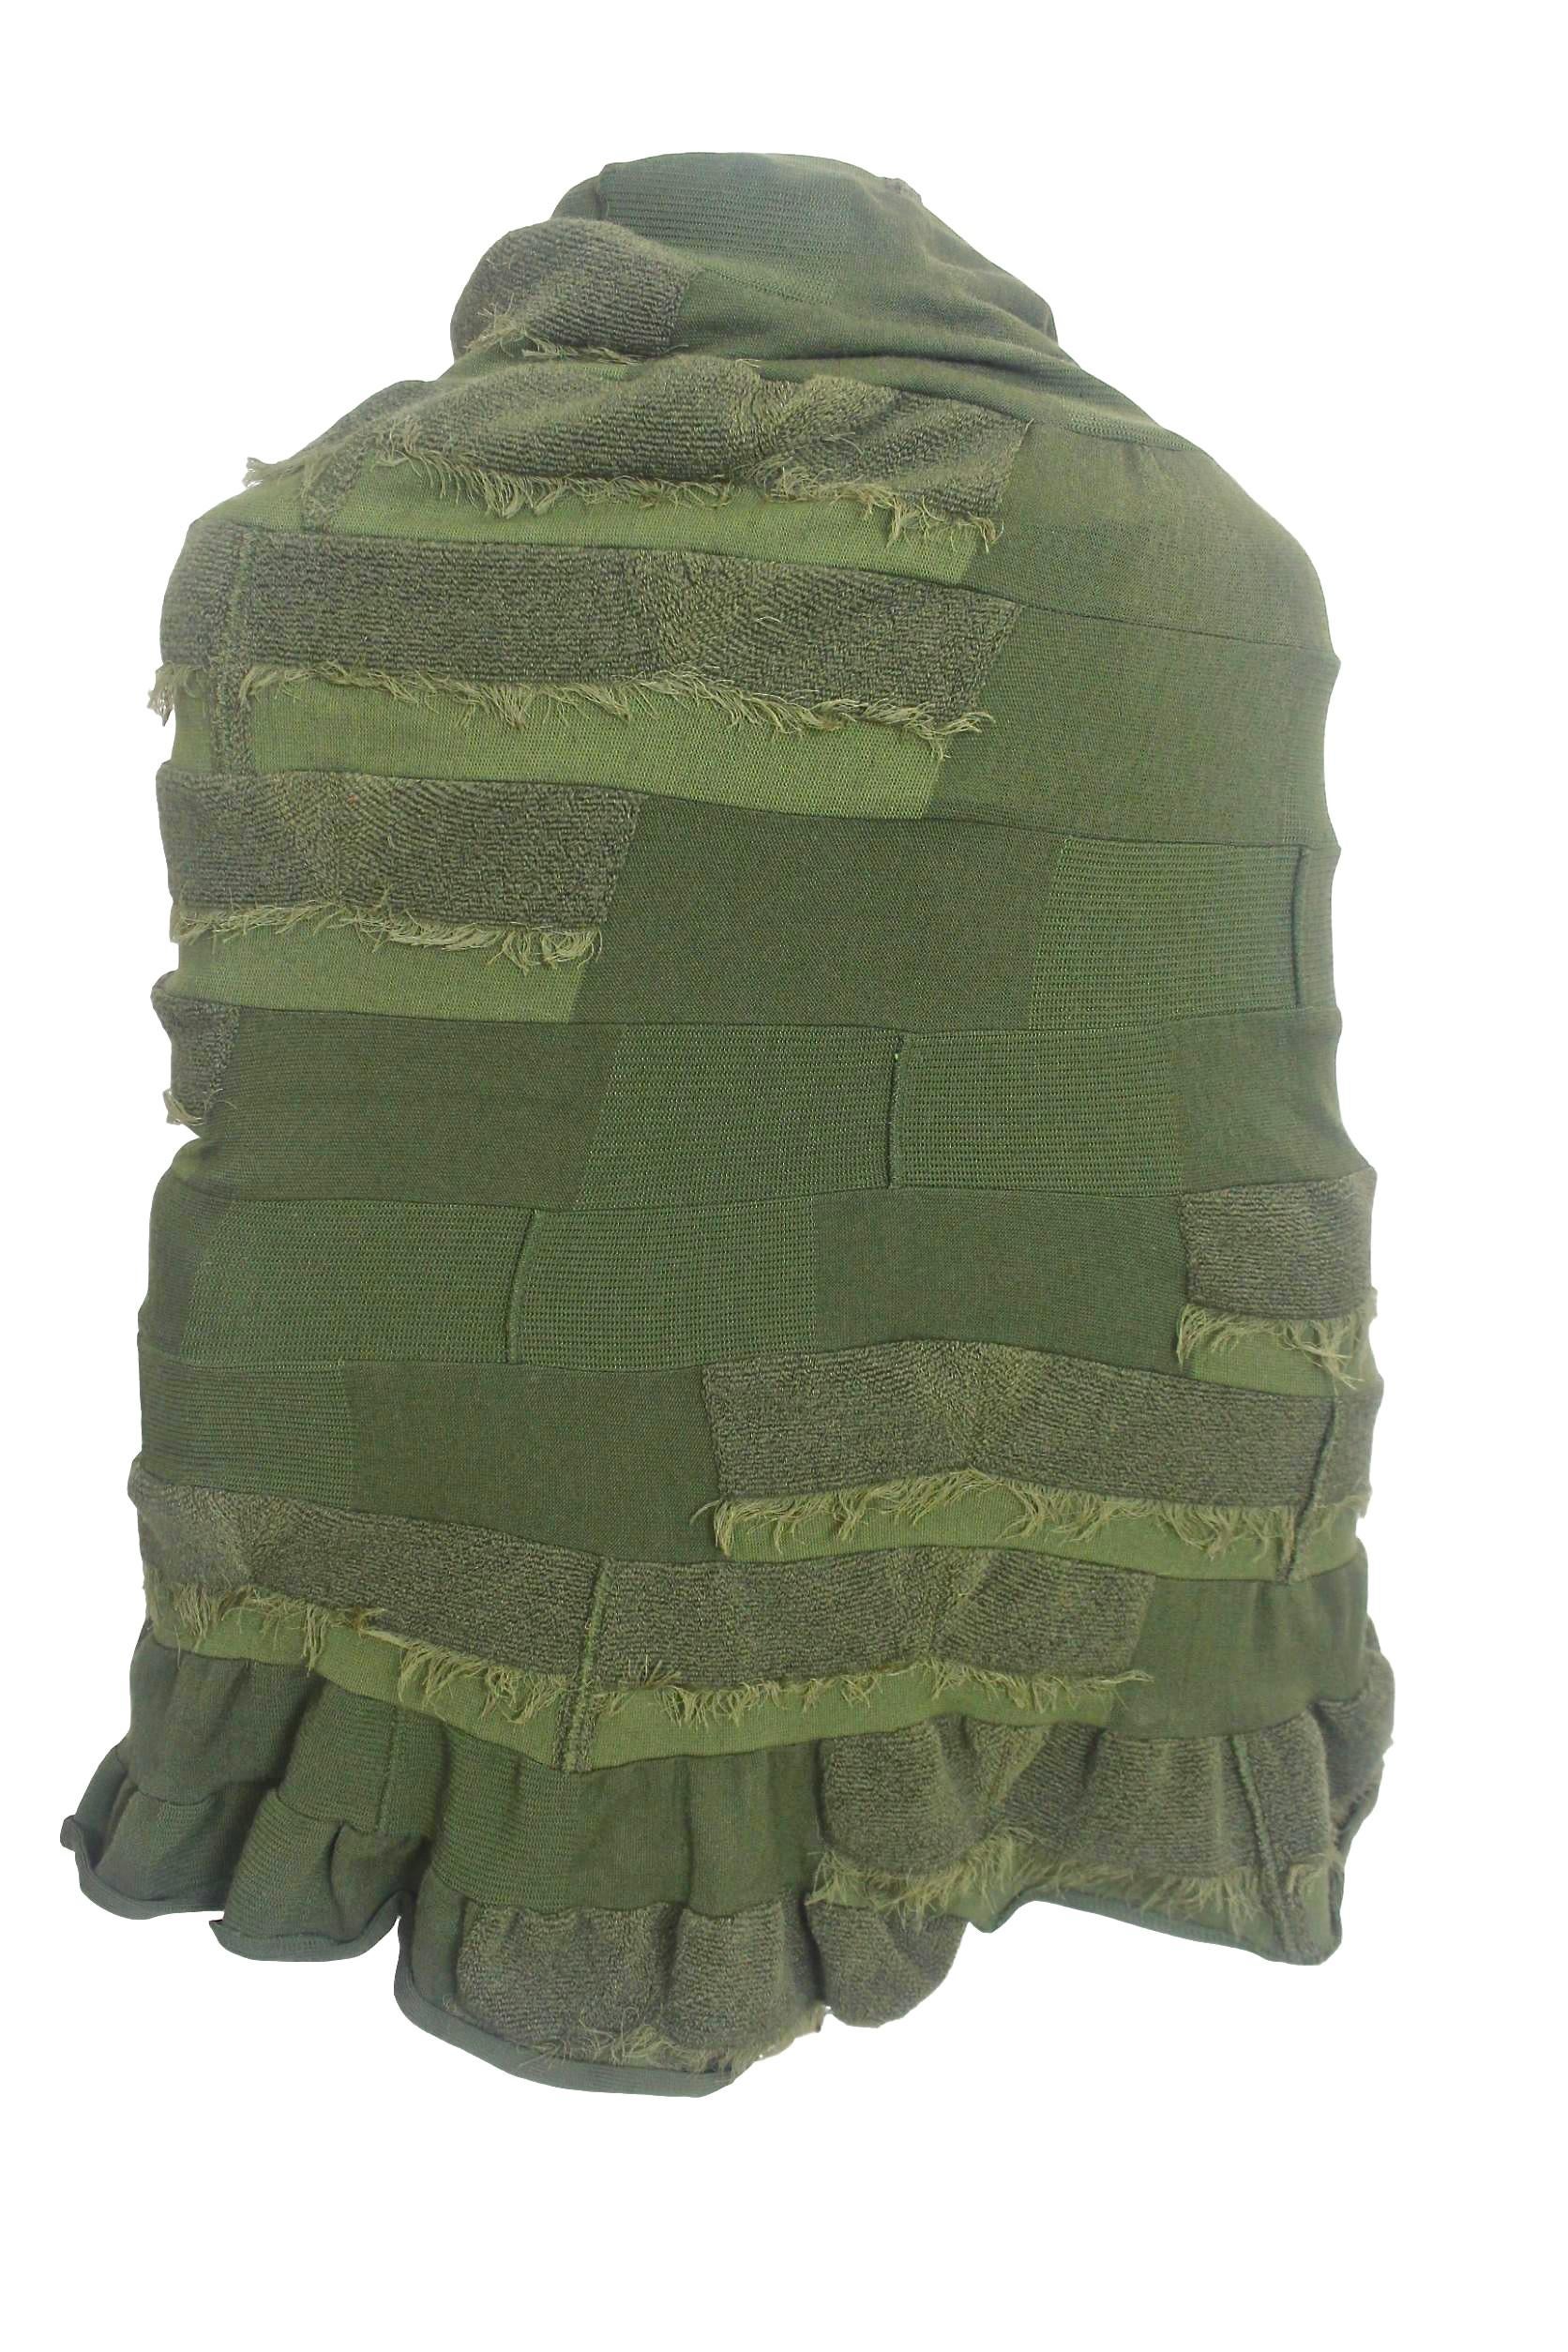 Comme des Garçons Junya Watanabe 2006 Collection Military Knitted Poncho 1